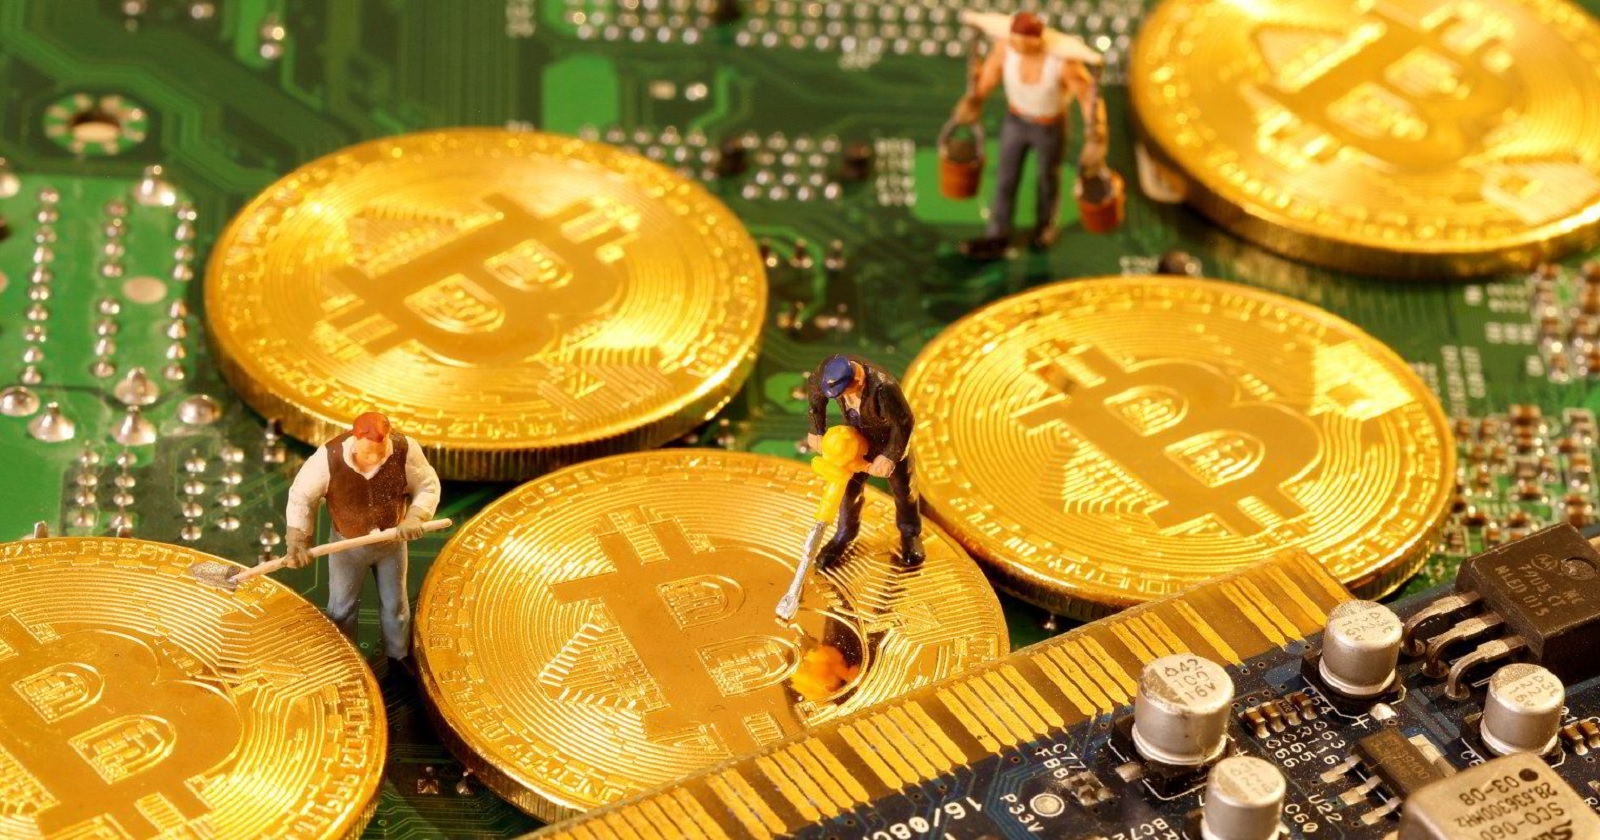 Bitcoin miner Core Scientific stock slumps 97% after bankruptcy warning